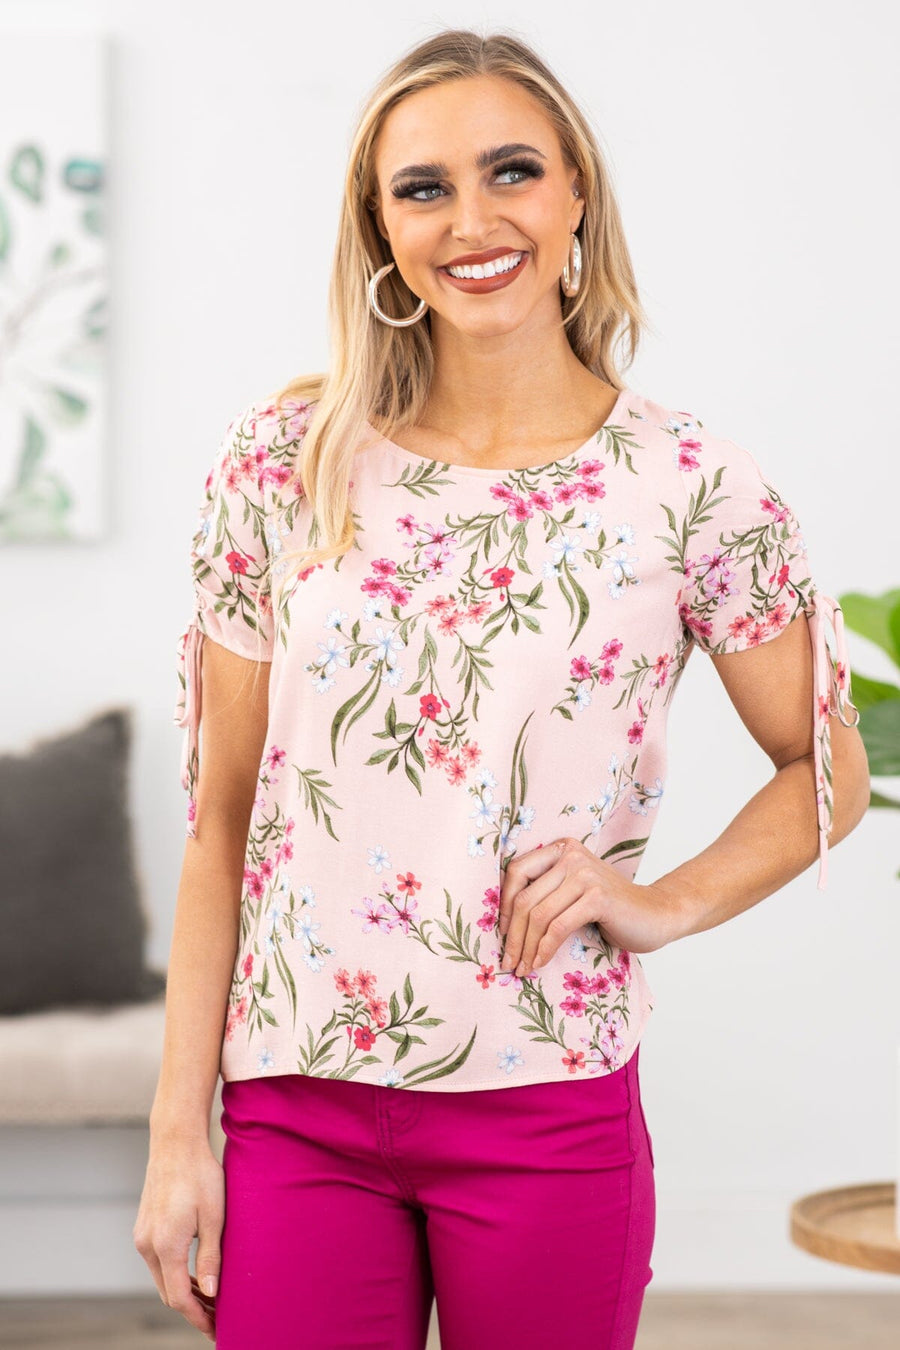 Baby Pink Floral Top With Sleeve Detail - Filly Flair